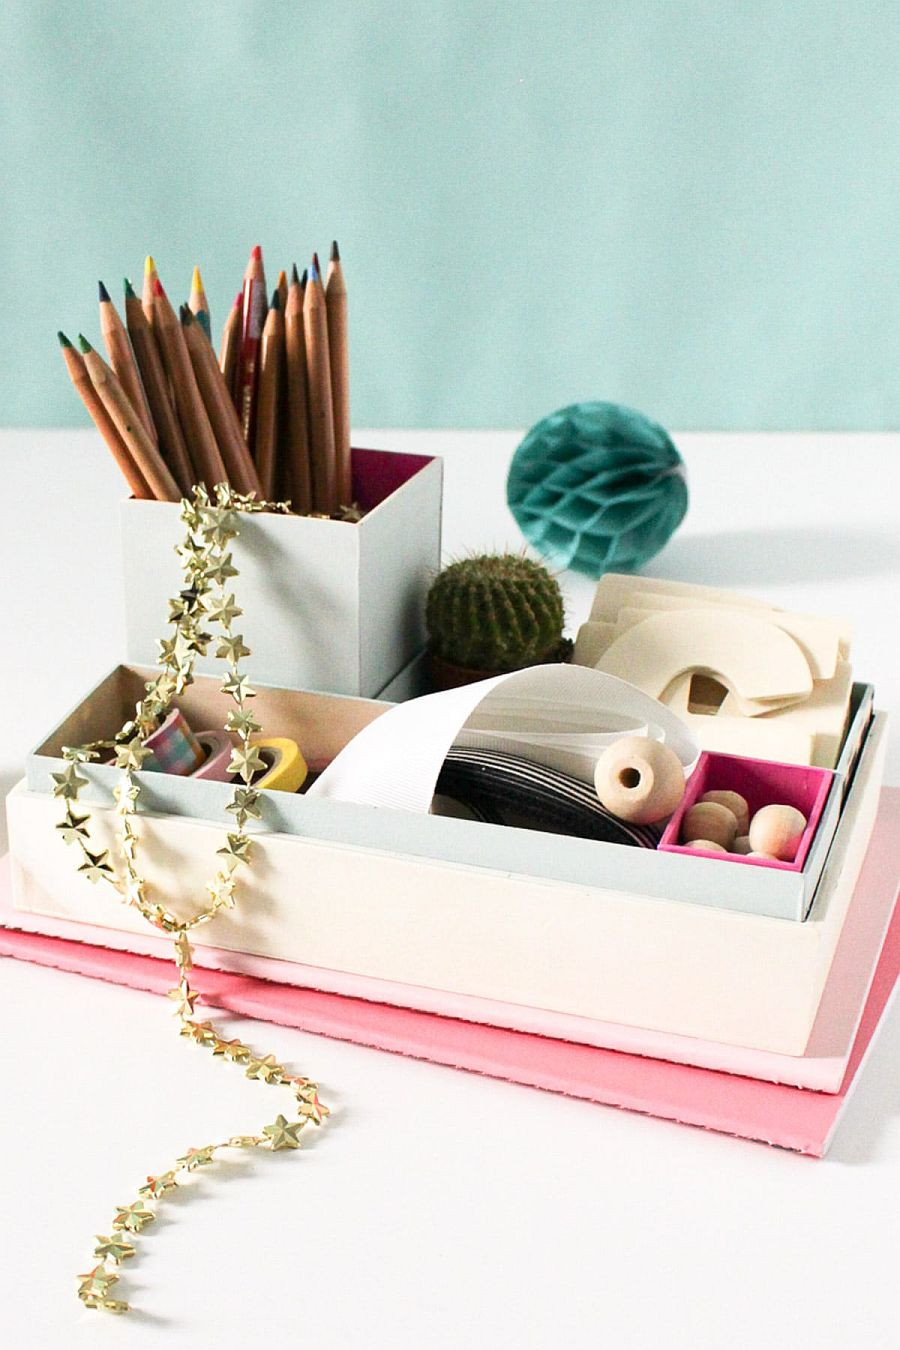 DIY Office Organizer
 20 DIY Desk Organizer Ideas and Projects to Try